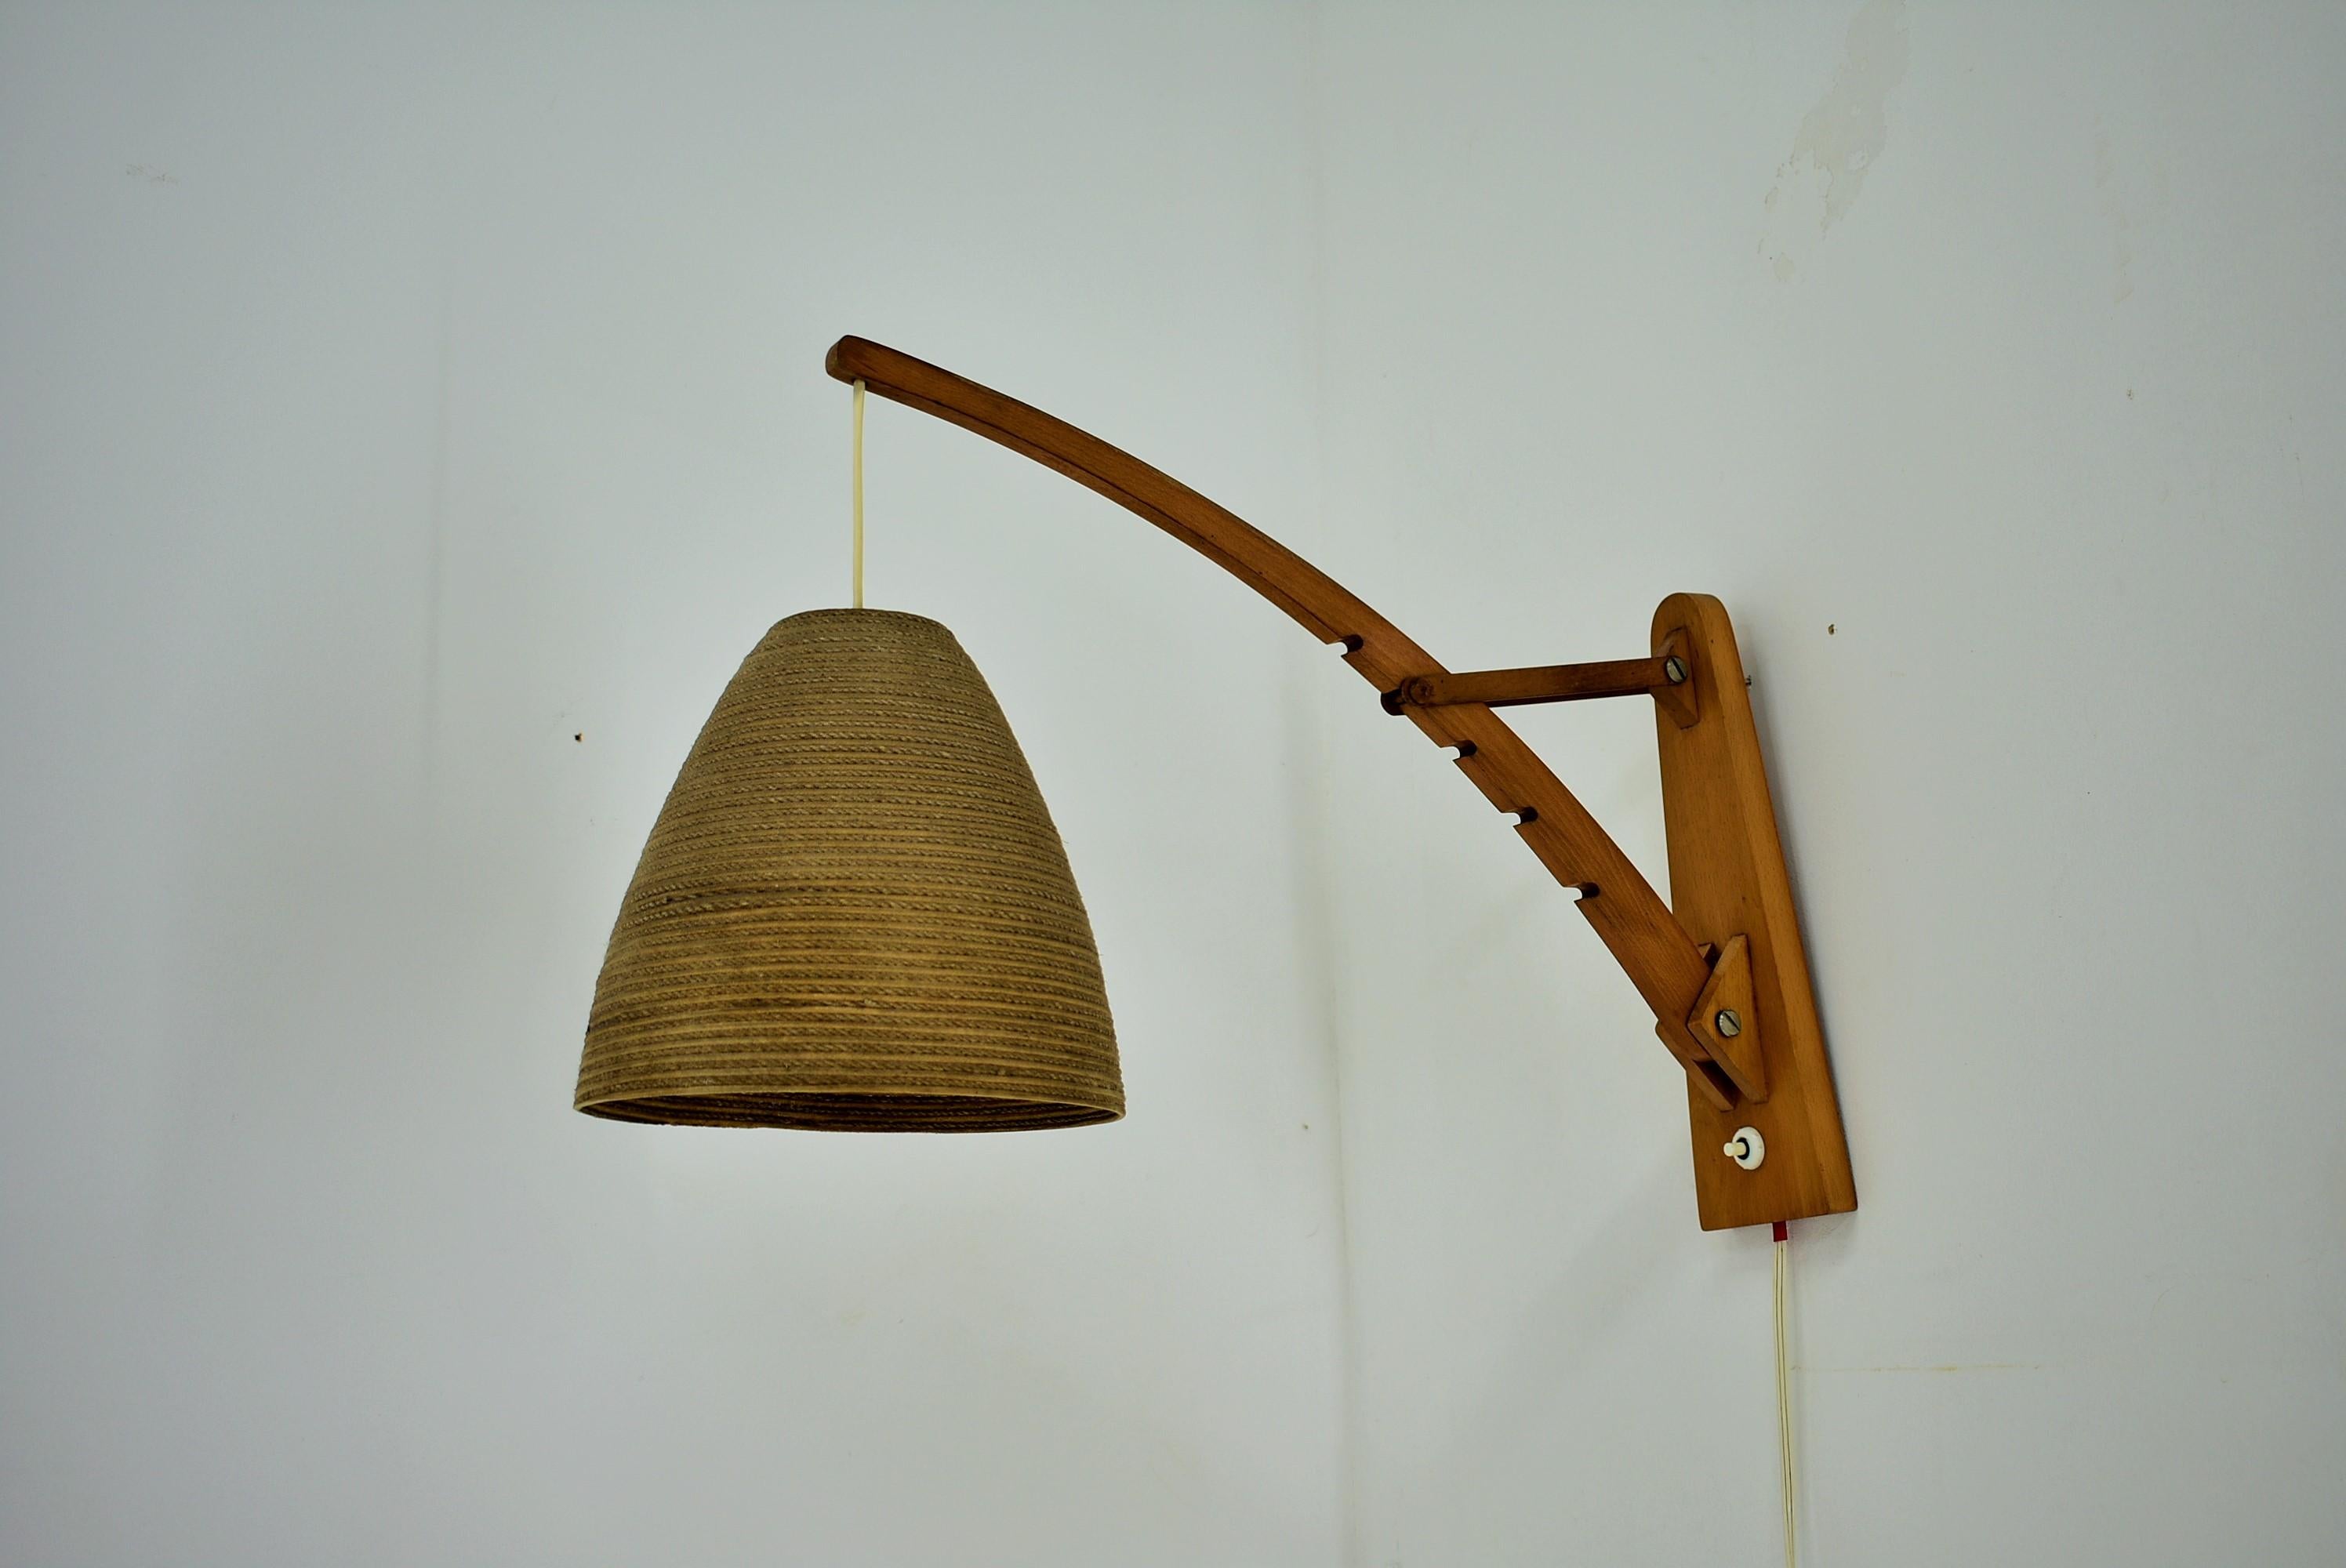 - good original condition, original with rope shade without any damage.
- made in czechoslovakia
- cleaned
- us adapler.